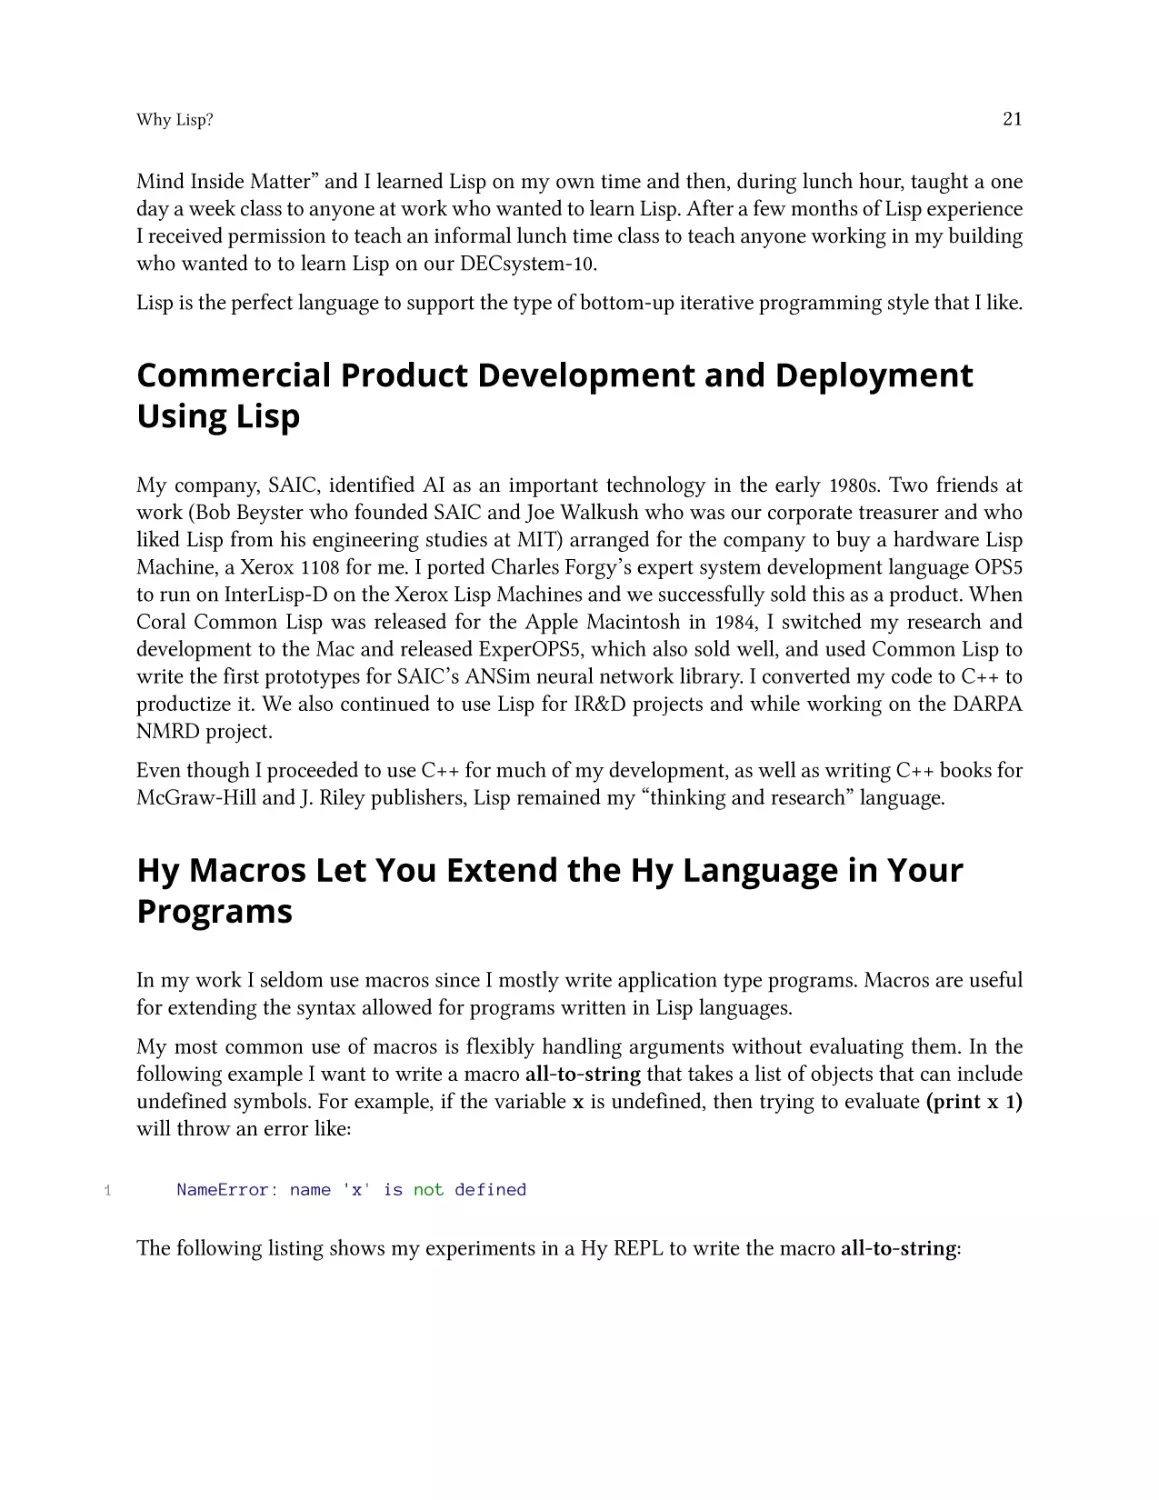 Commercial Product Development and Deployment Using Lisp
Hy Macros Let You Extend the Hy Language in Your Programs